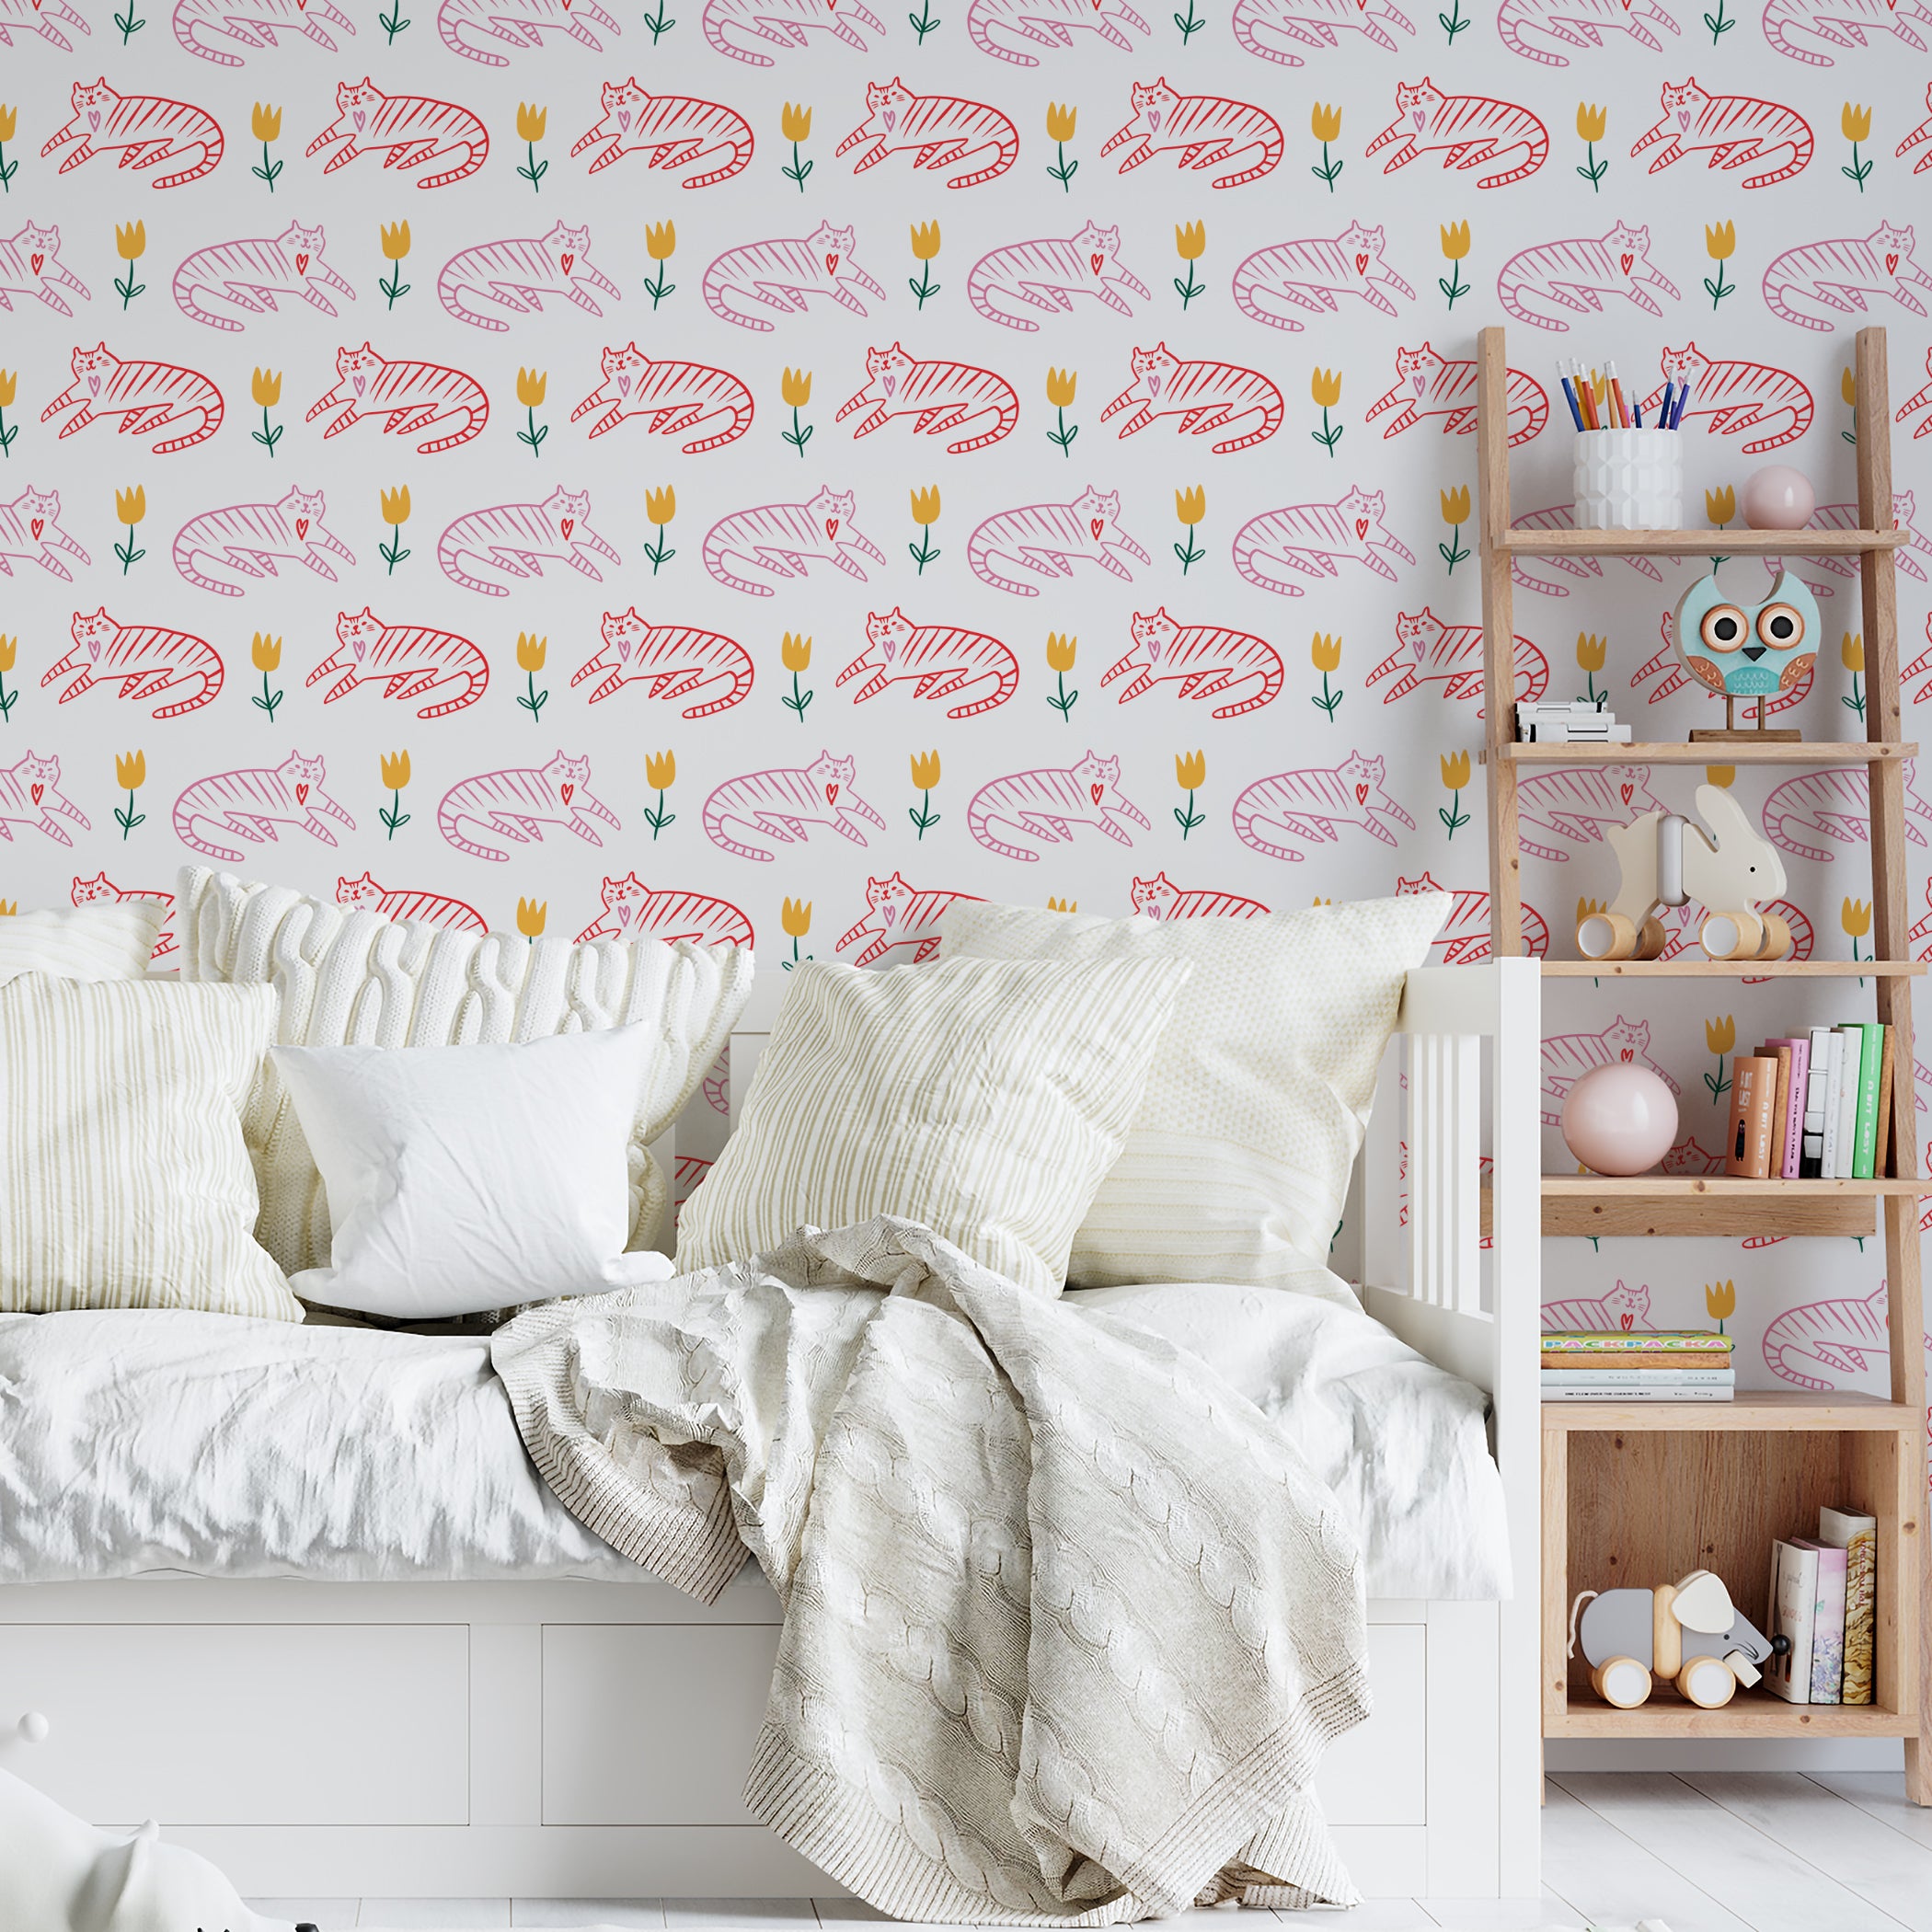 Children's bedroom decor utilizing 'Cat Wallpaper 1' with red striped cats and green tulips creating a playful and inviting atmosphere. The room is complemented by white and neutral bedding, enhancing the bright and cheerful wallpaper pattern